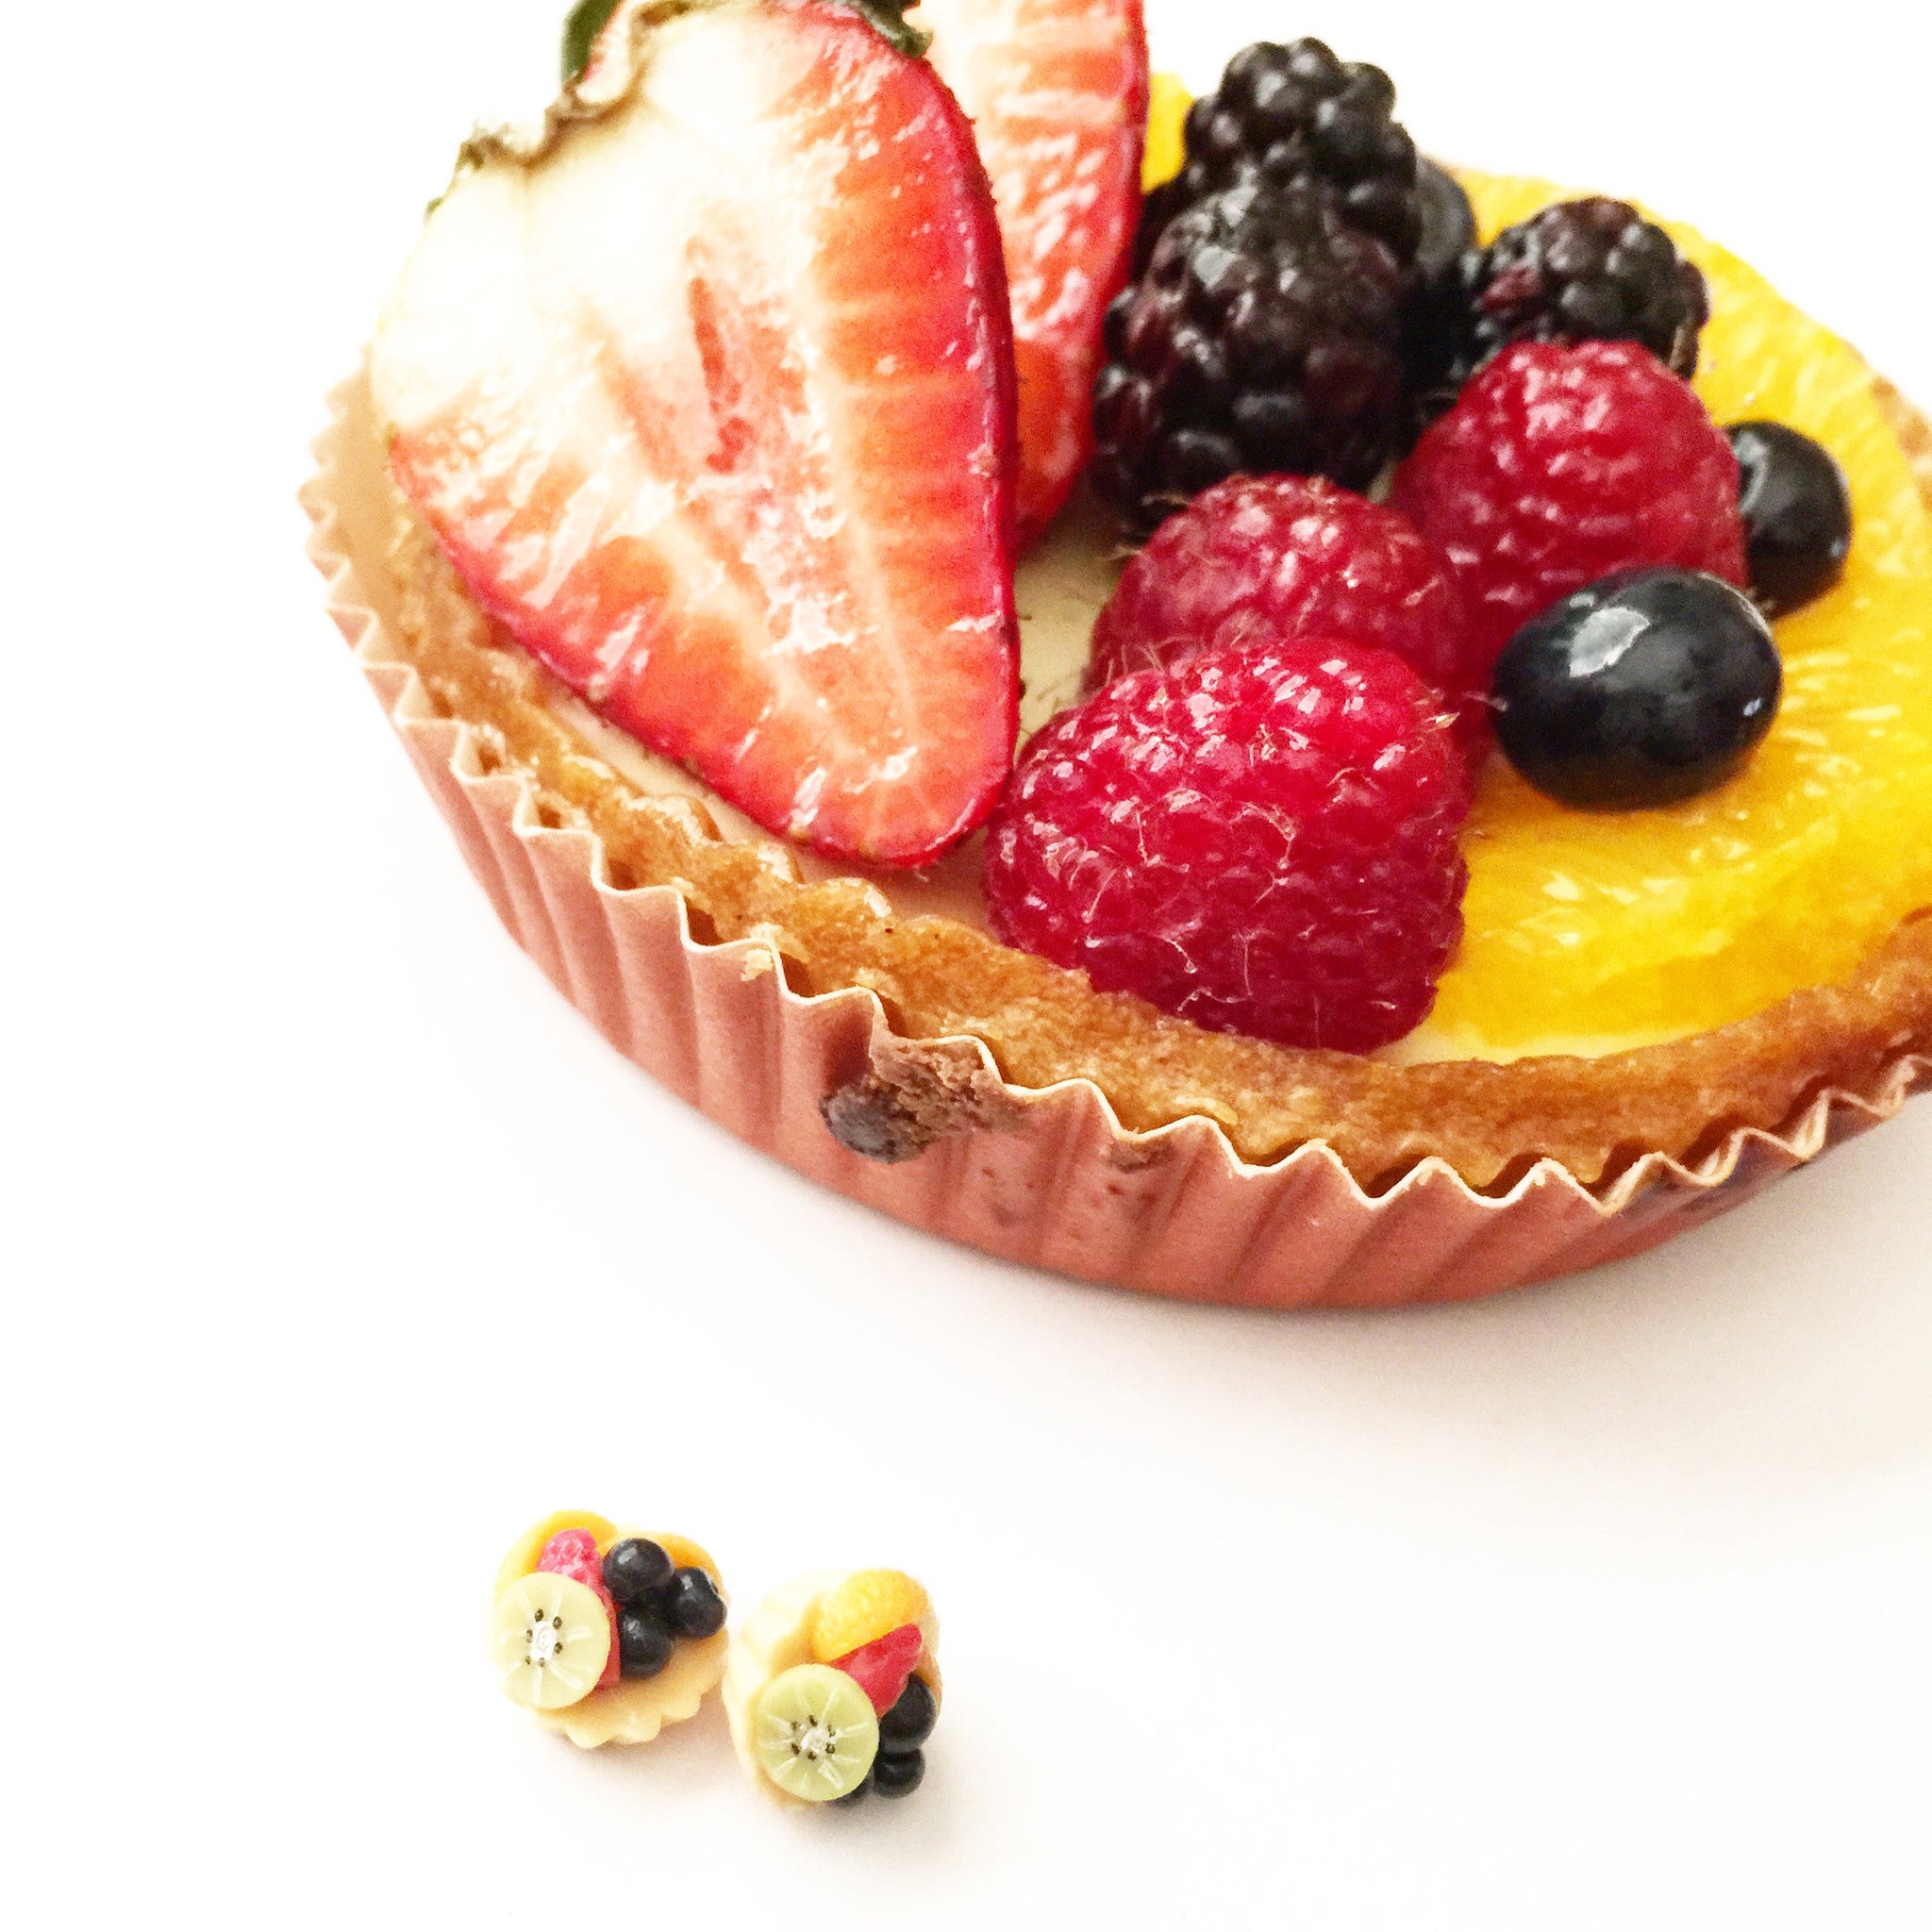 Fruit Tart Earrings - Jillicious charms and accessories